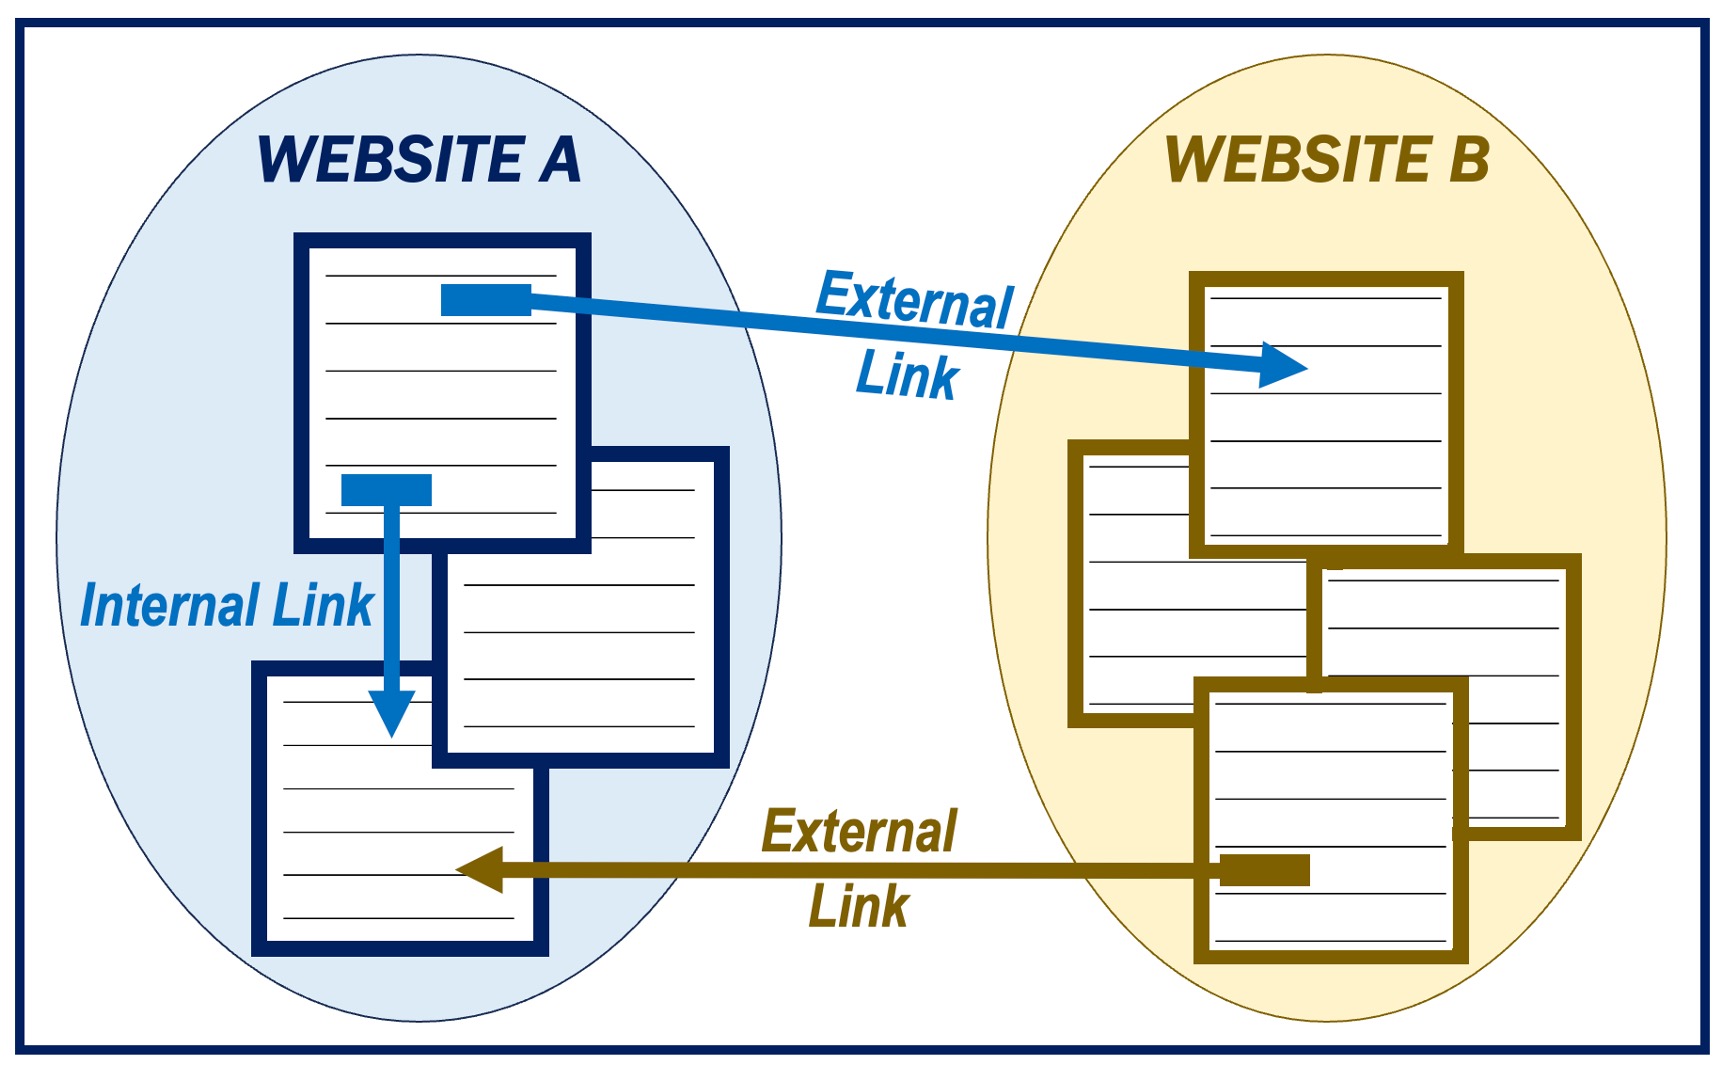 Image showing the difference between an Internal Link and External Link.